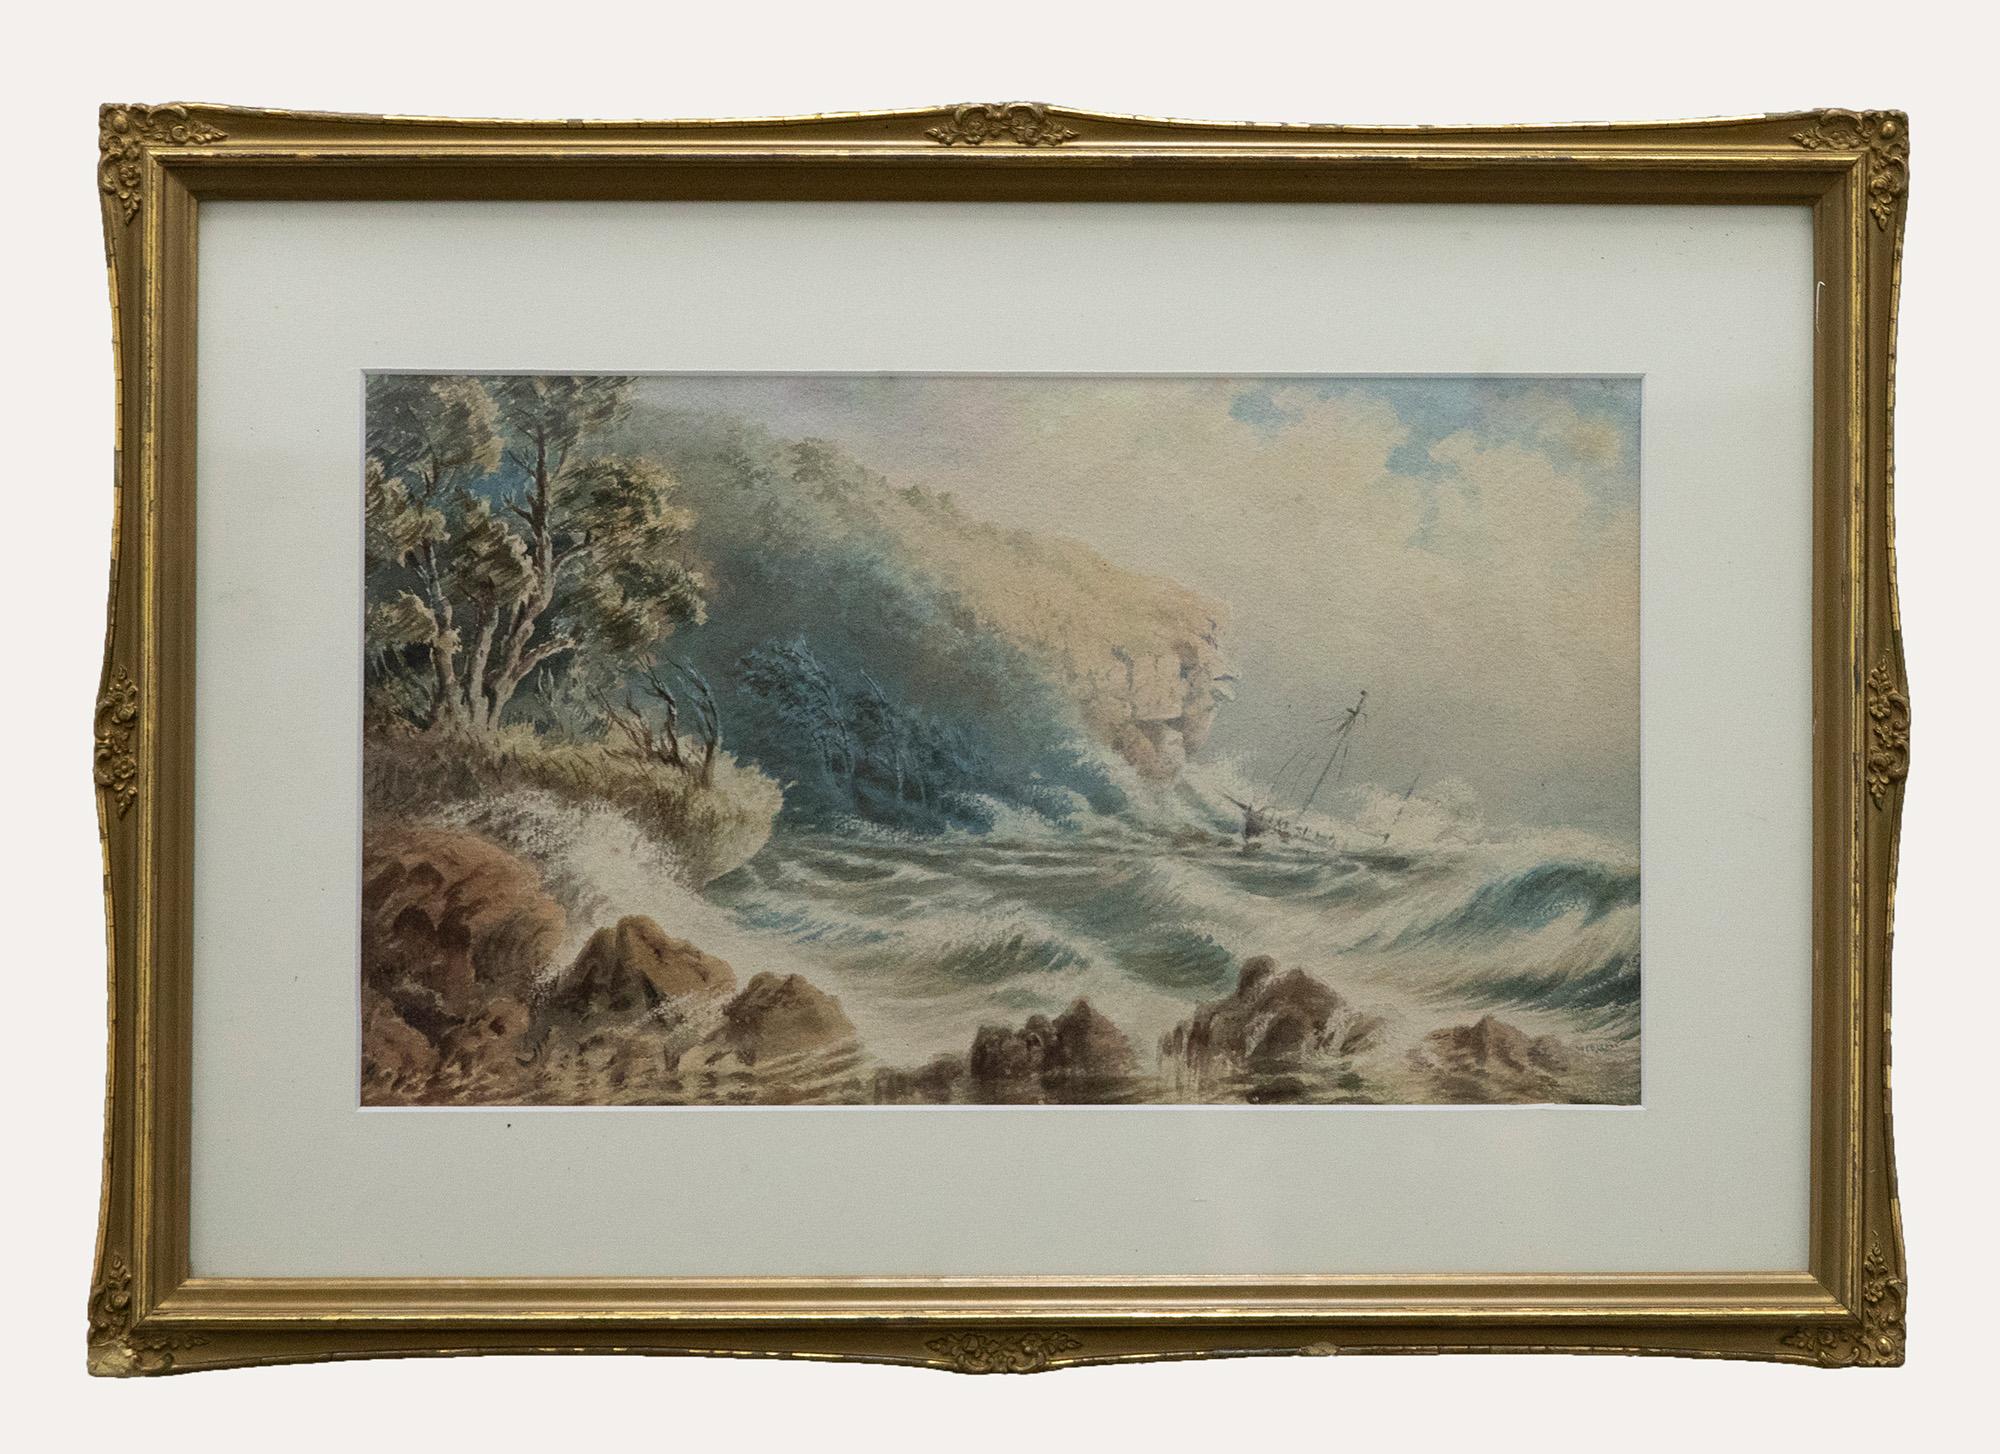 Unknown Figurative Art - William H Raworth (1820-1905) - Framed Watercolour, Ship in Stormy Seas